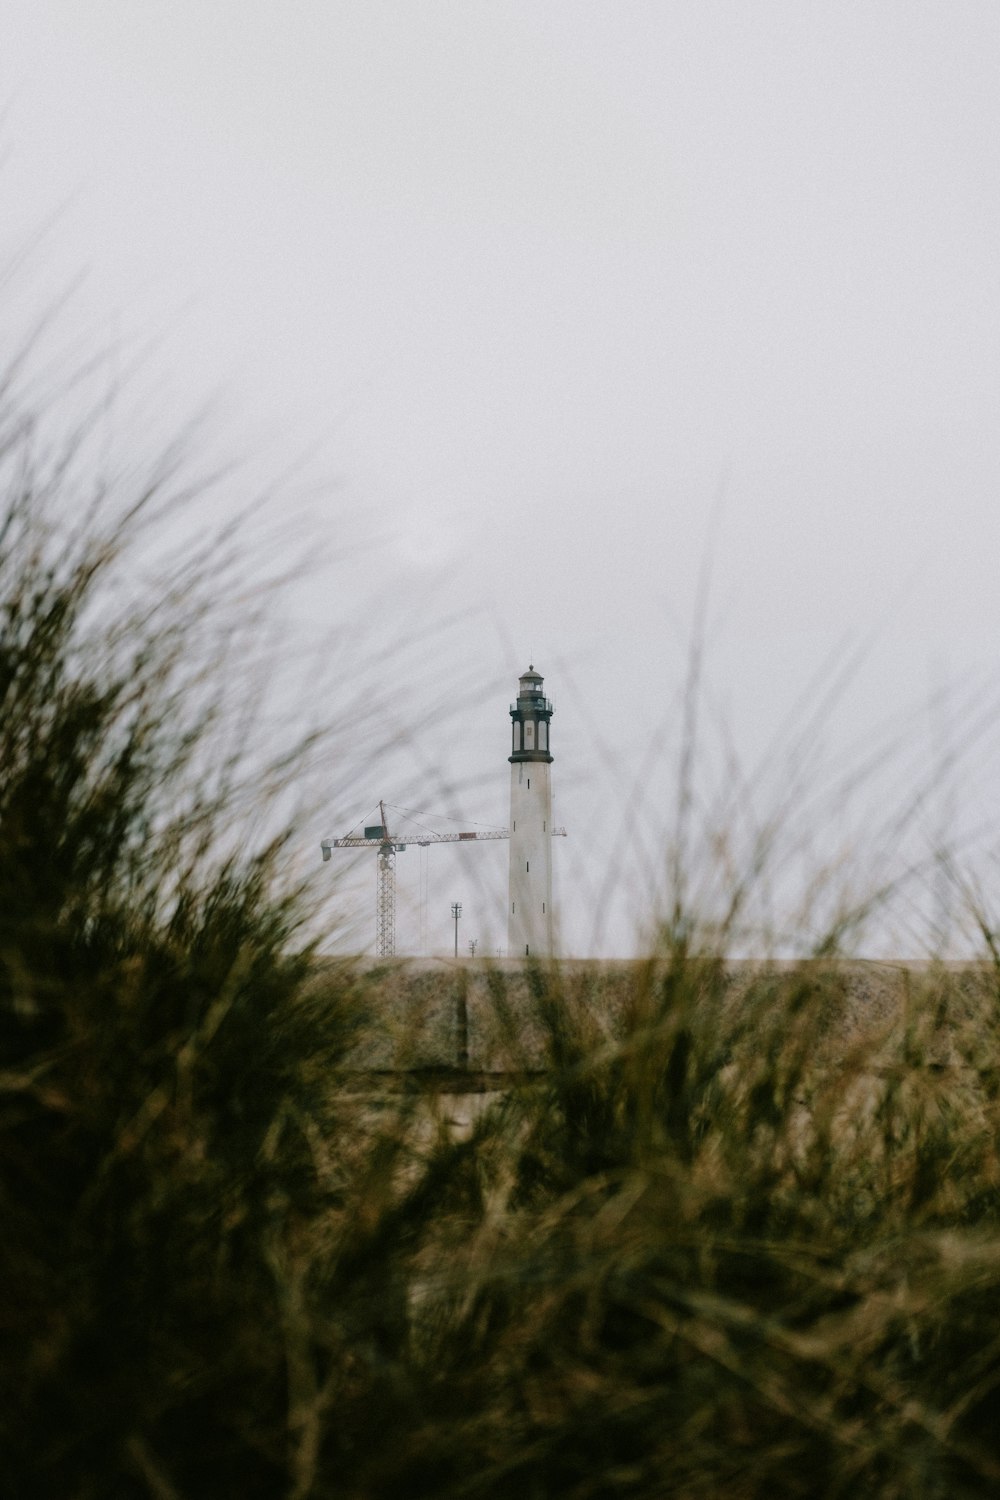 a white lighthouse surrounded by tall grass on a cloudy day